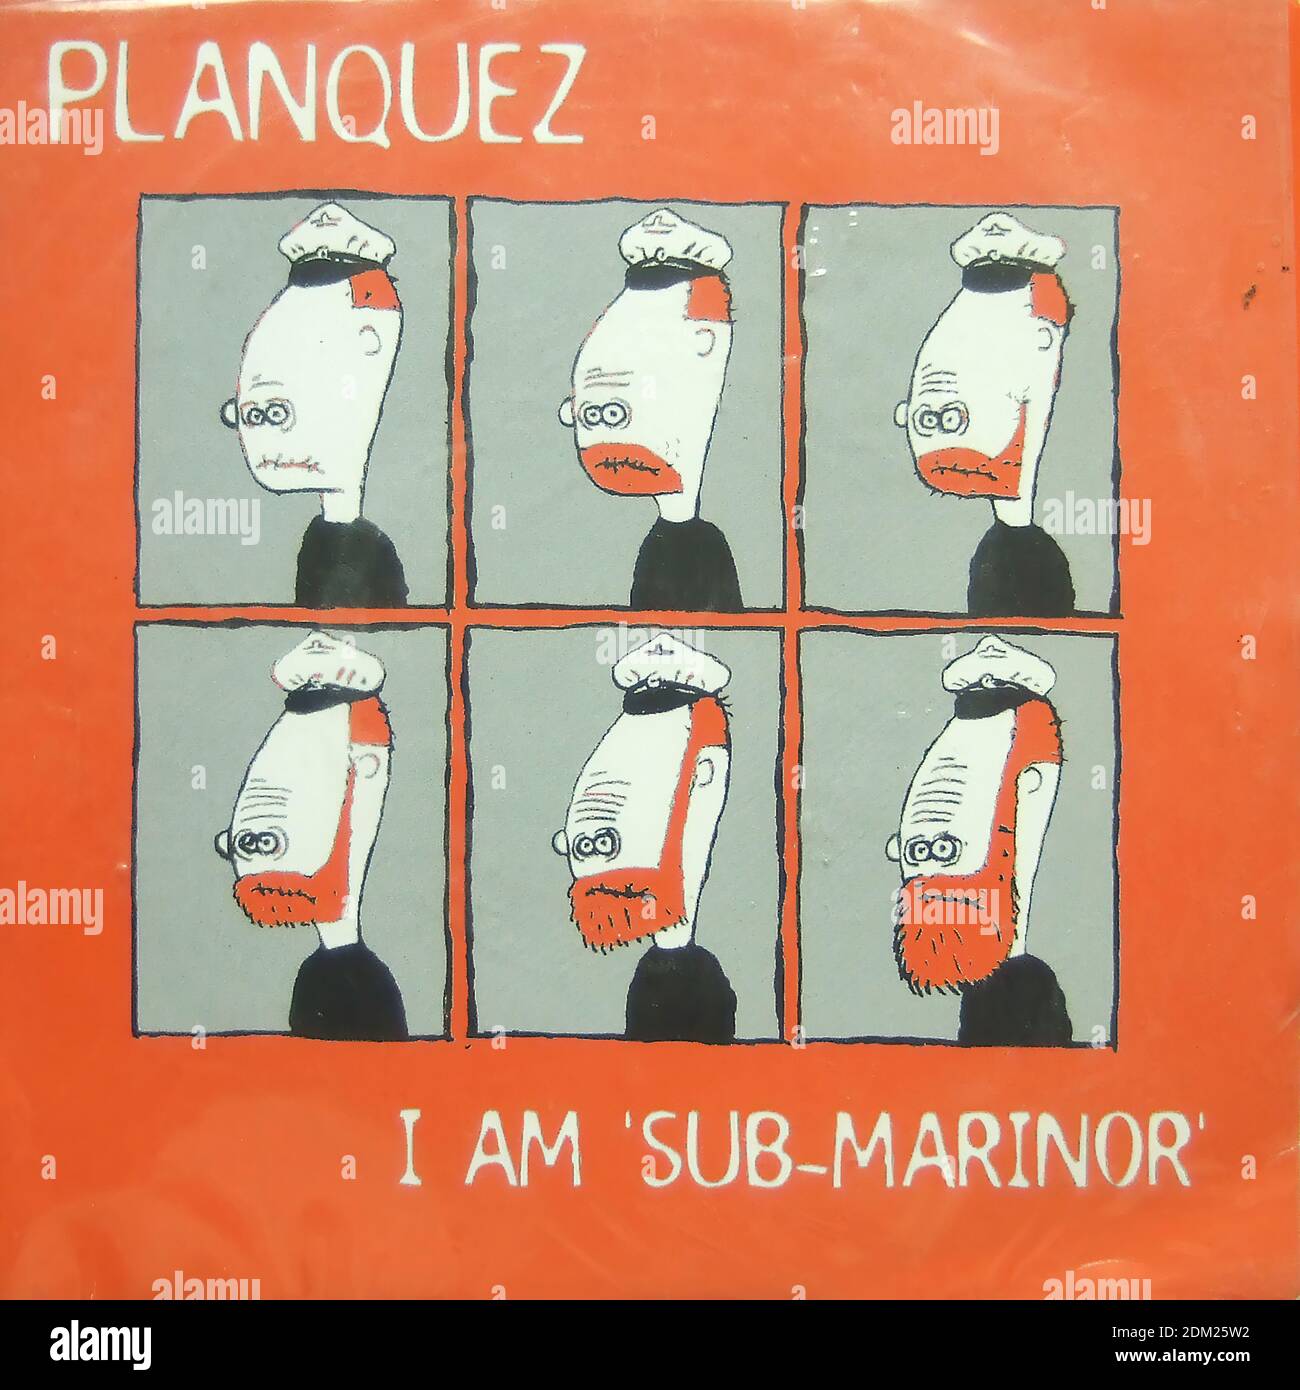 Planquez - I Am A  Sub-Marinor , Seed - 7 inch Single 45rpm, Meddle med 004, 1996 - Vintage vinyl album cover Stock Photo